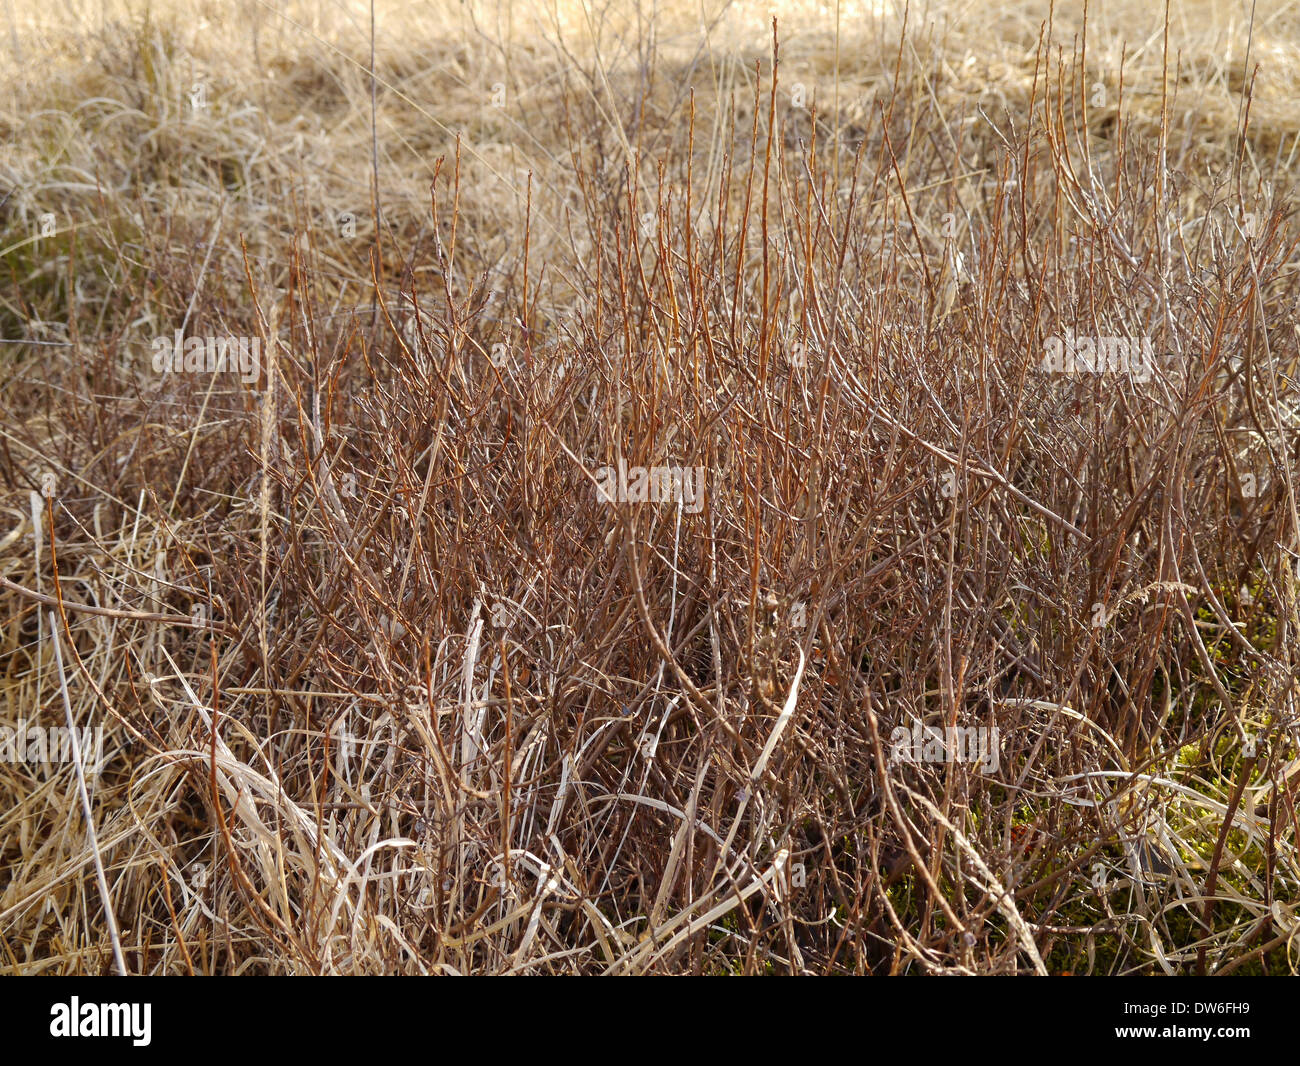 Bog bilberry shrubs without leaves in spring Stock Photo